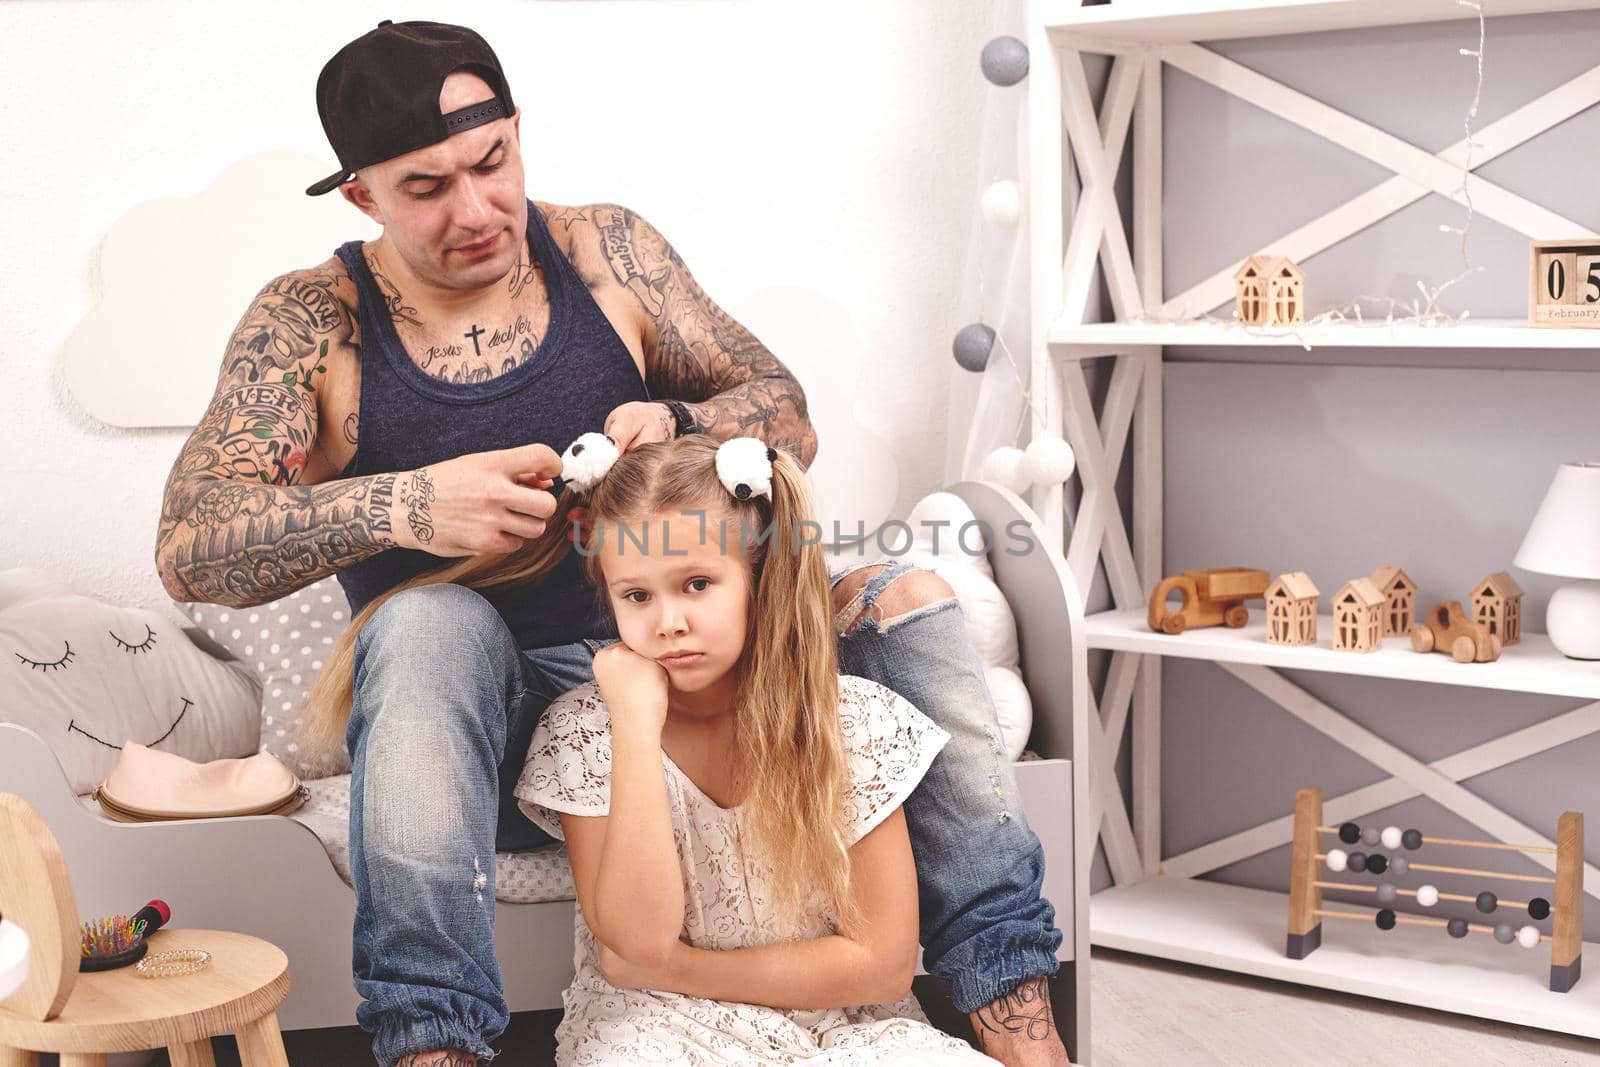 Funny time Handsome tattoed father in a cap and his child are playing at home. Dad is doing his daughter's hair in her bedroom. Family holiday and togetherness.